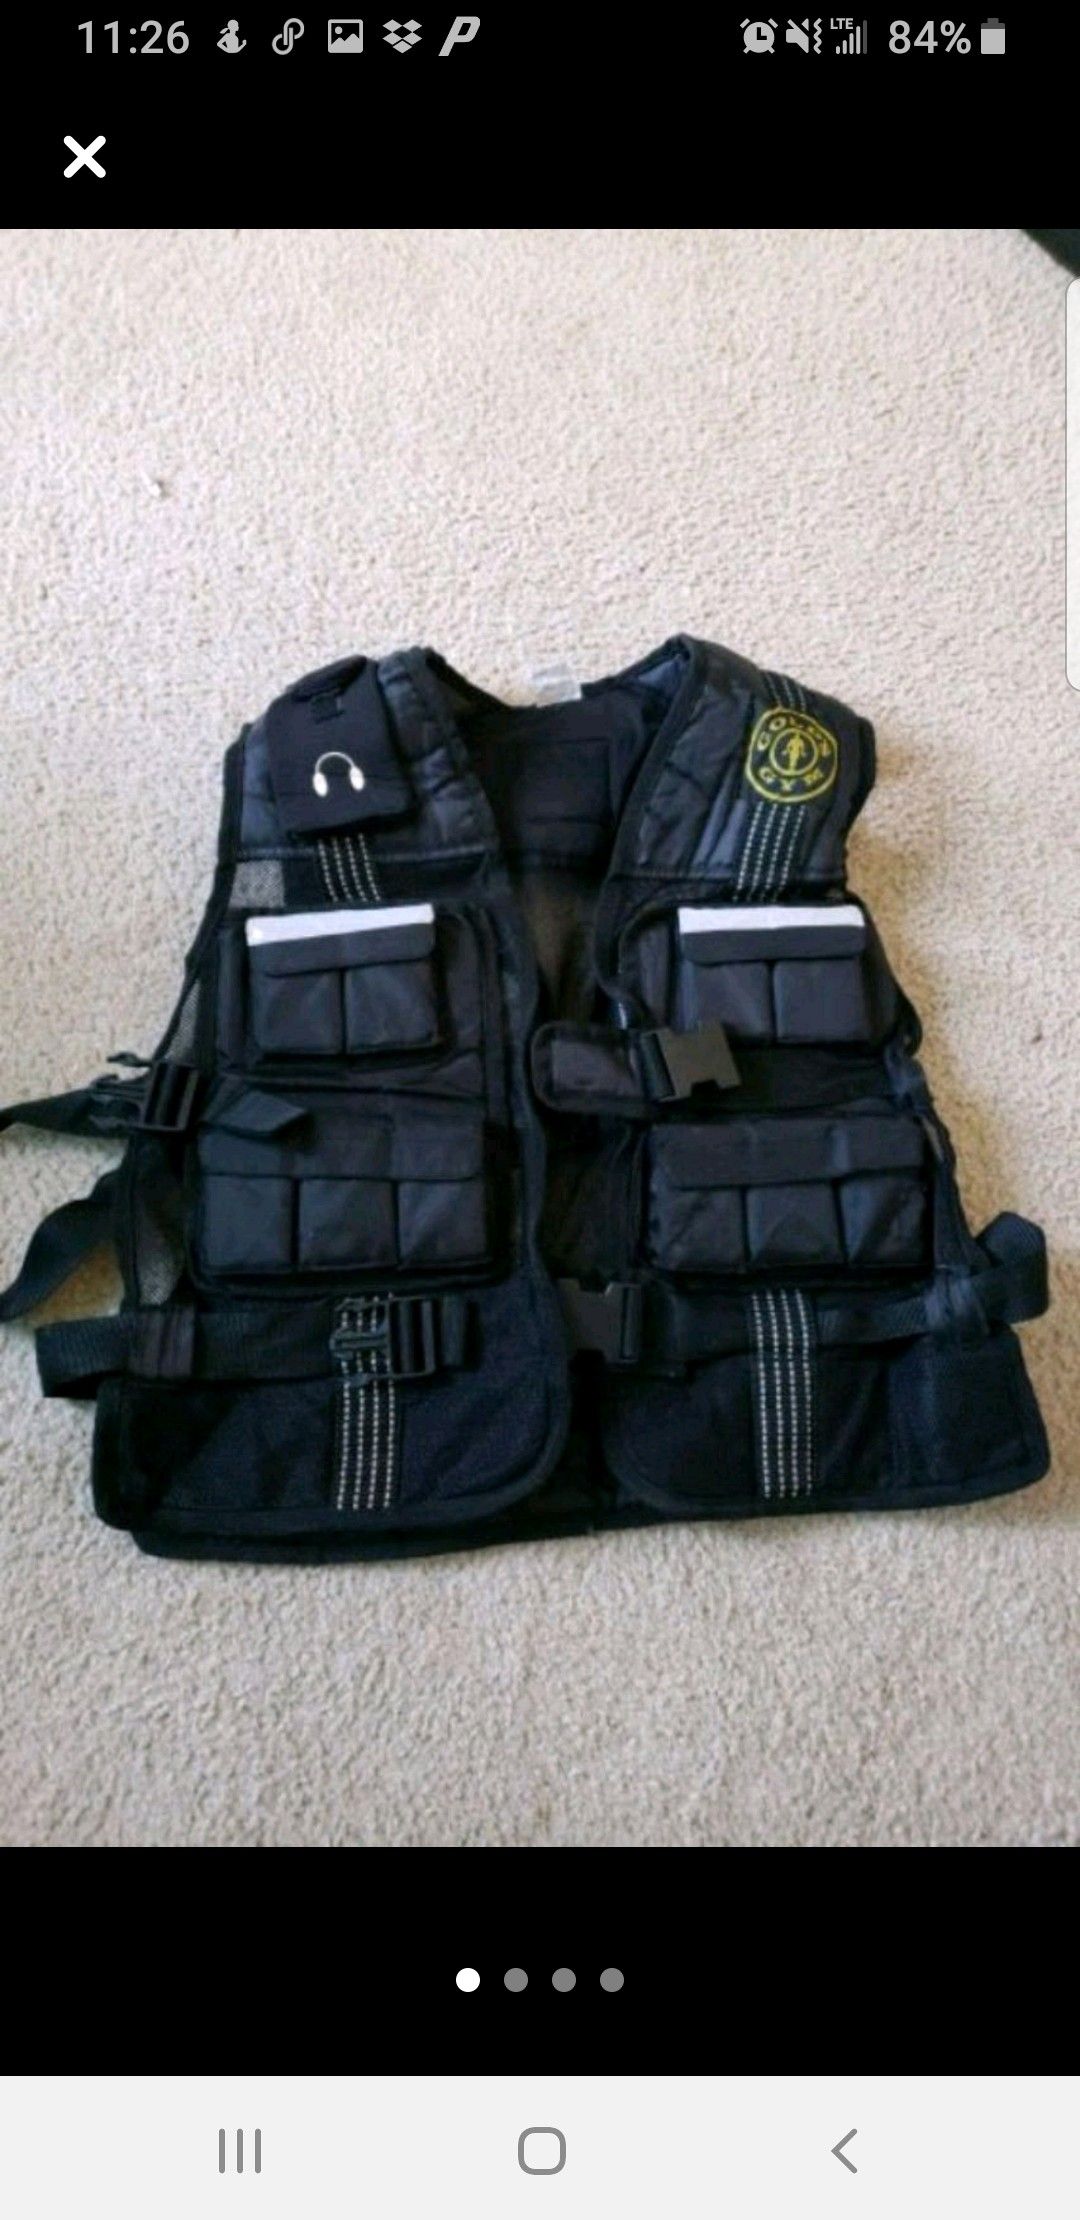 Golds Gym Weighted Vest